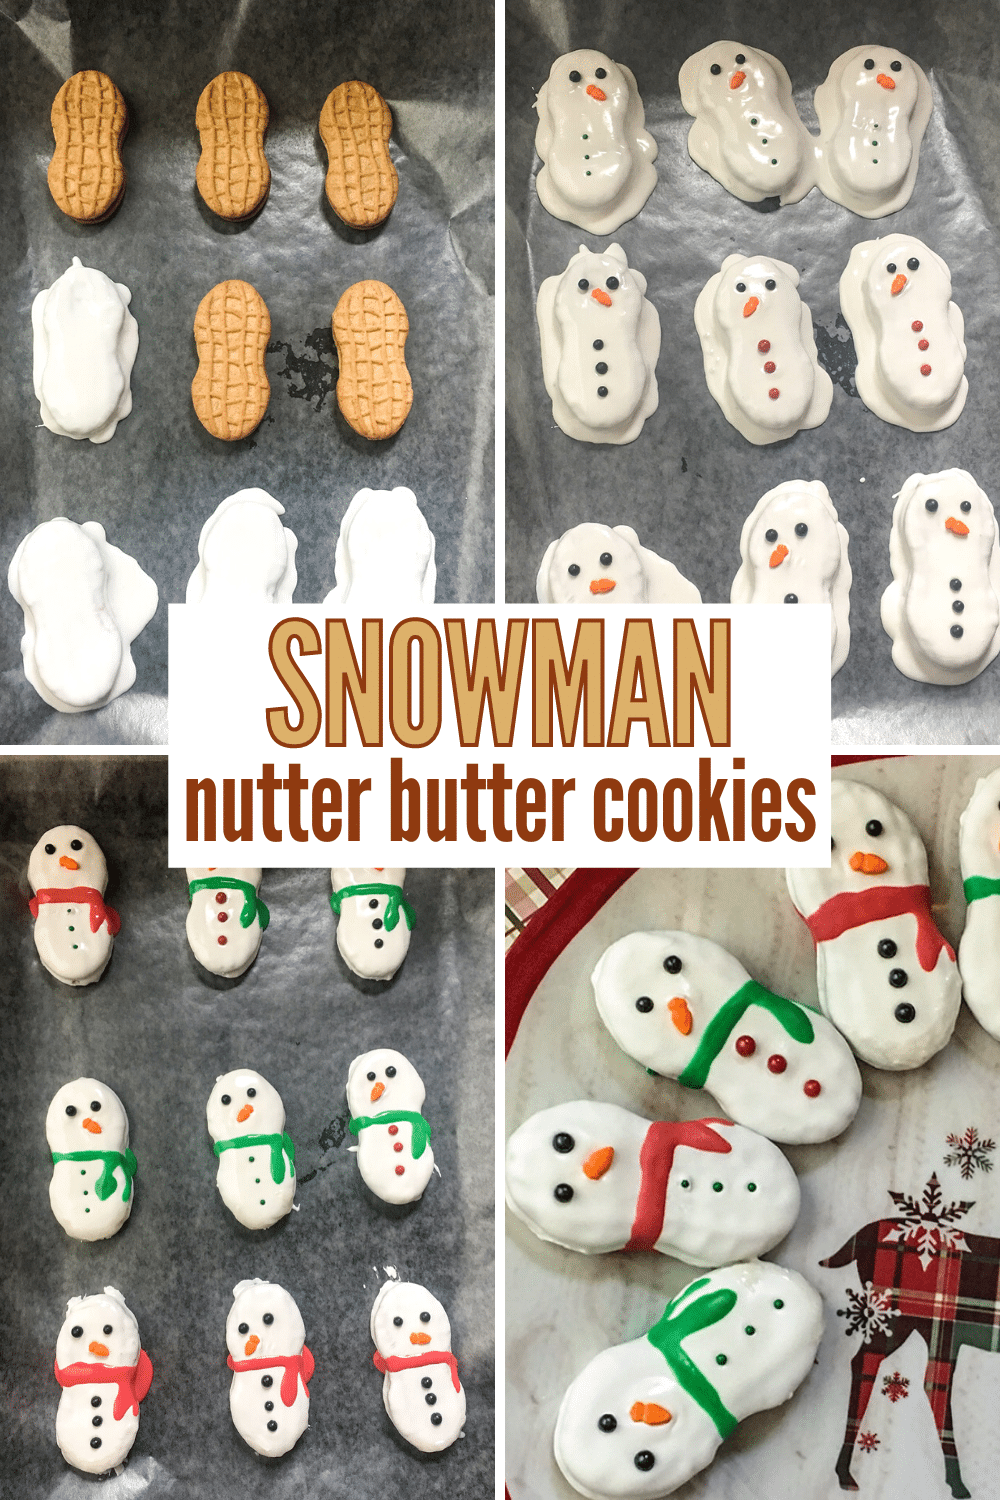 These Snowman Nutter Butter Cookies are an adorable winter treat and they're super easy to make! #nutterbutter #funfoodforkids #wintertreat via @wondermomwannab